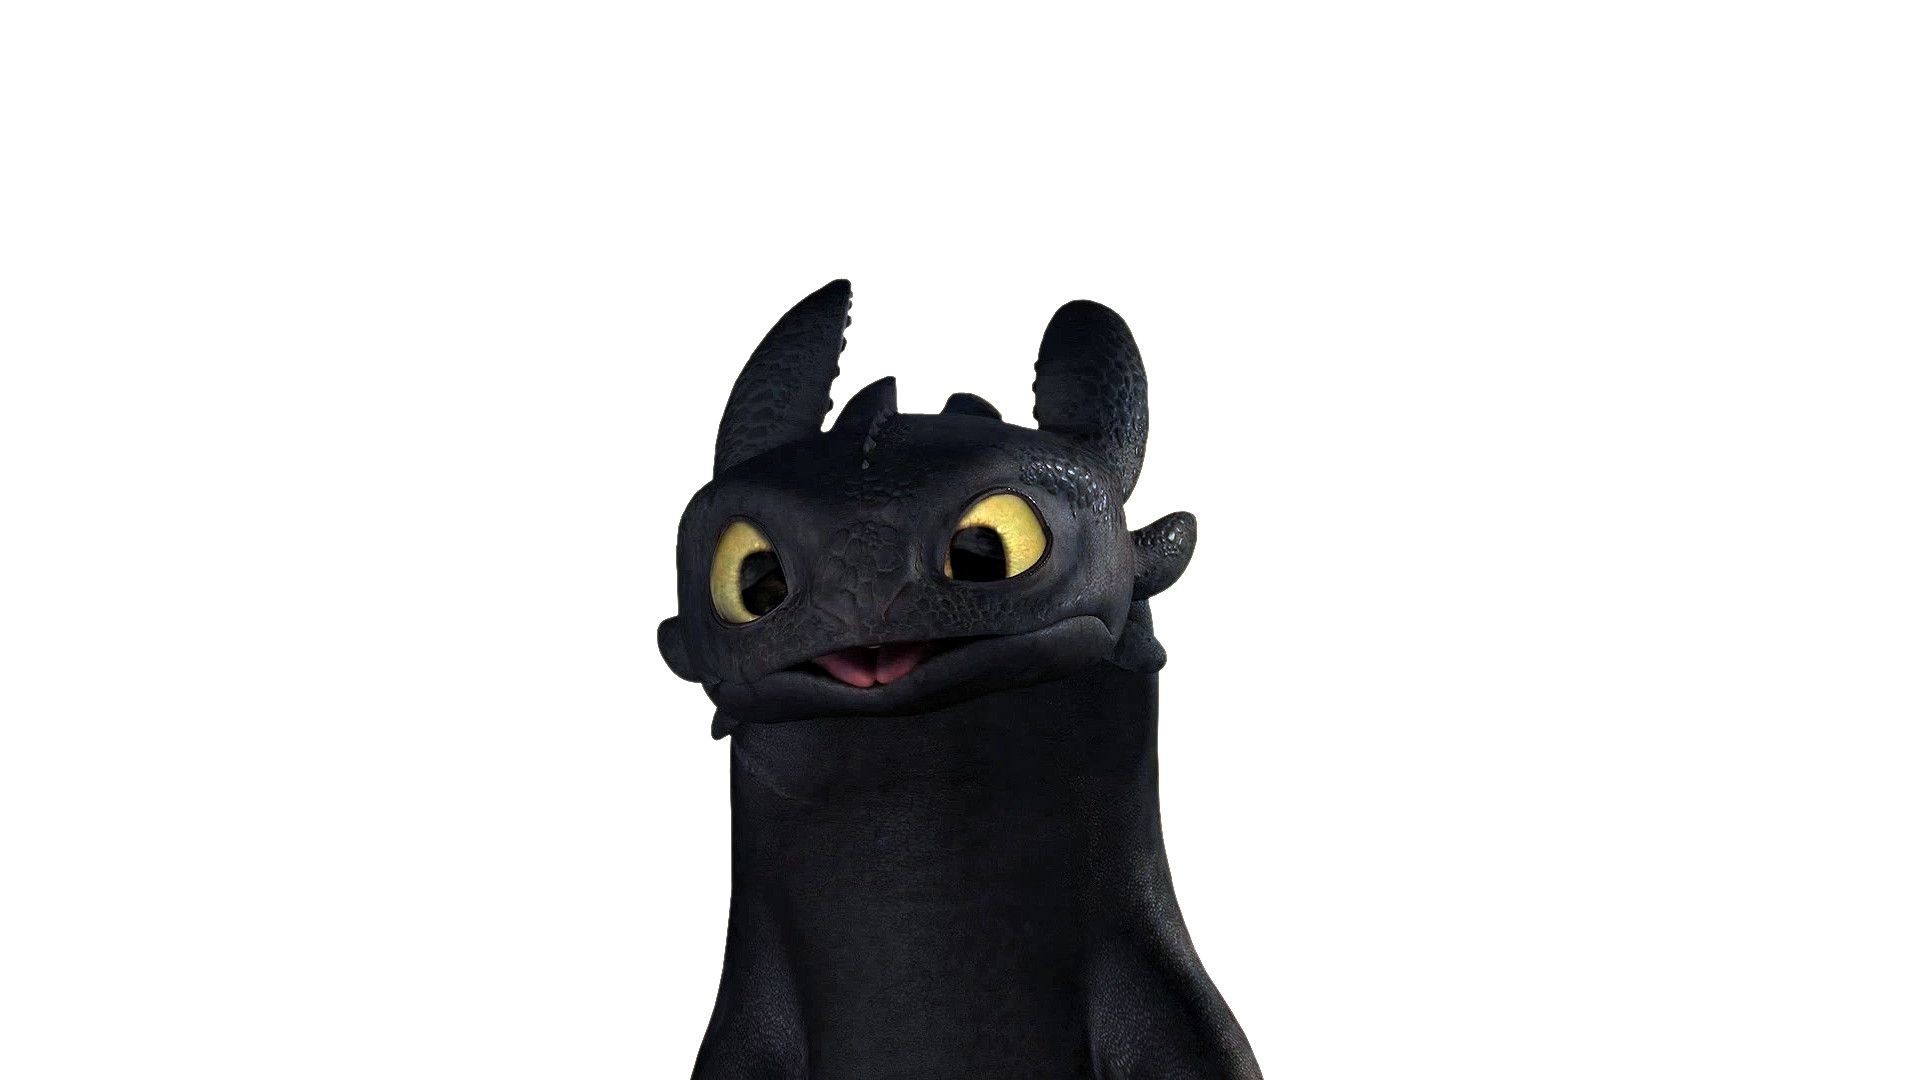 Toothless Wallpapers 1080p 1920x1080